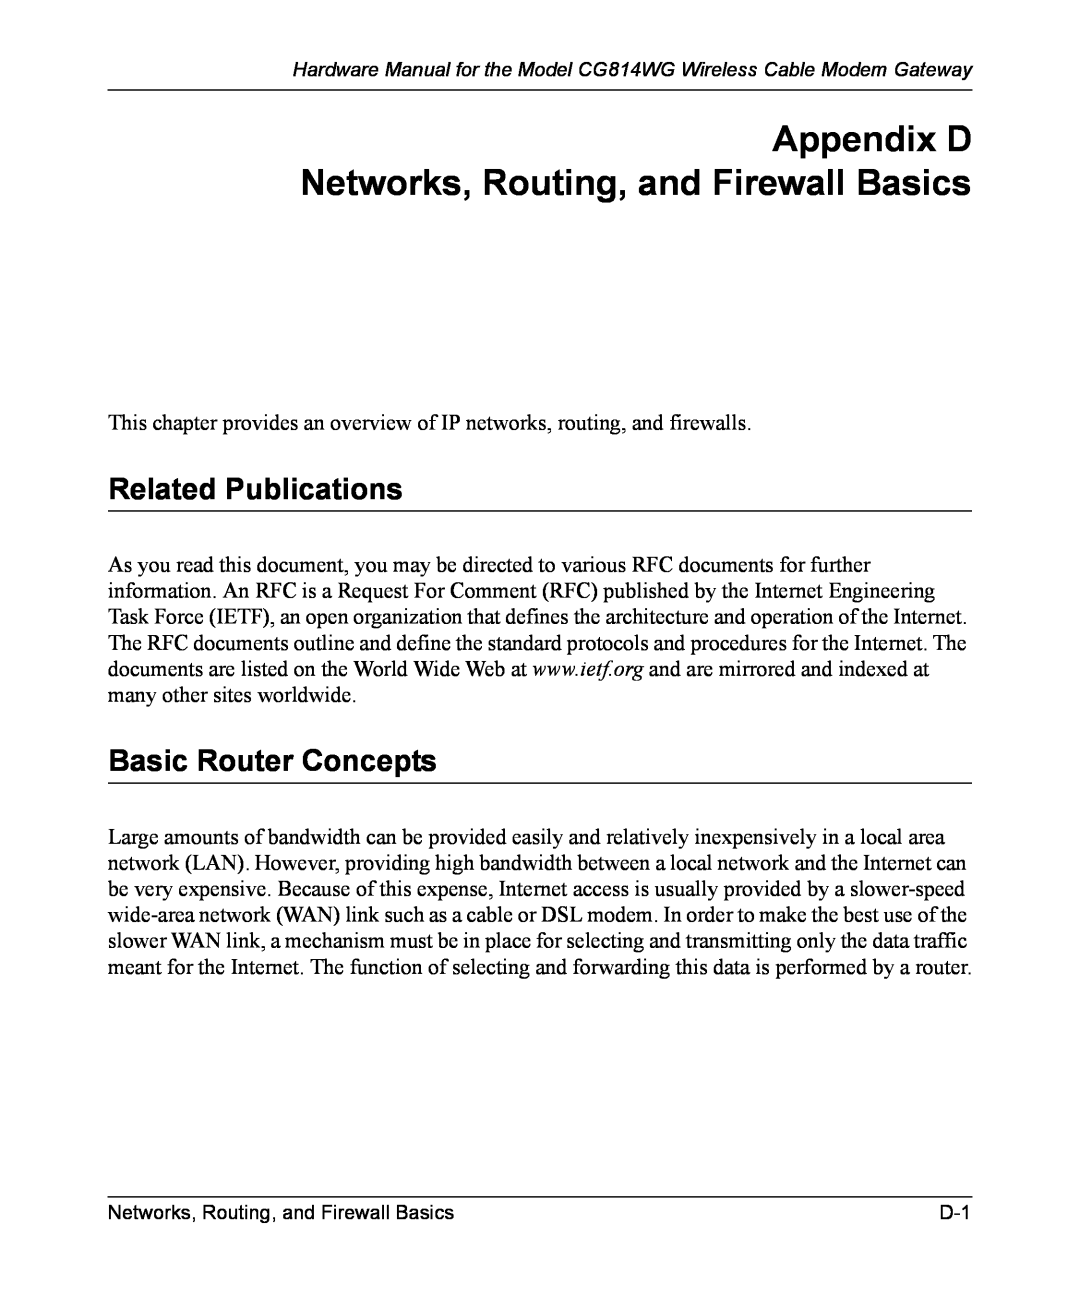 NETGEAR CG814WG manual Appendix D Networks, Routing, and Firewall Basics, Related Publications, Basic Router Concepts 